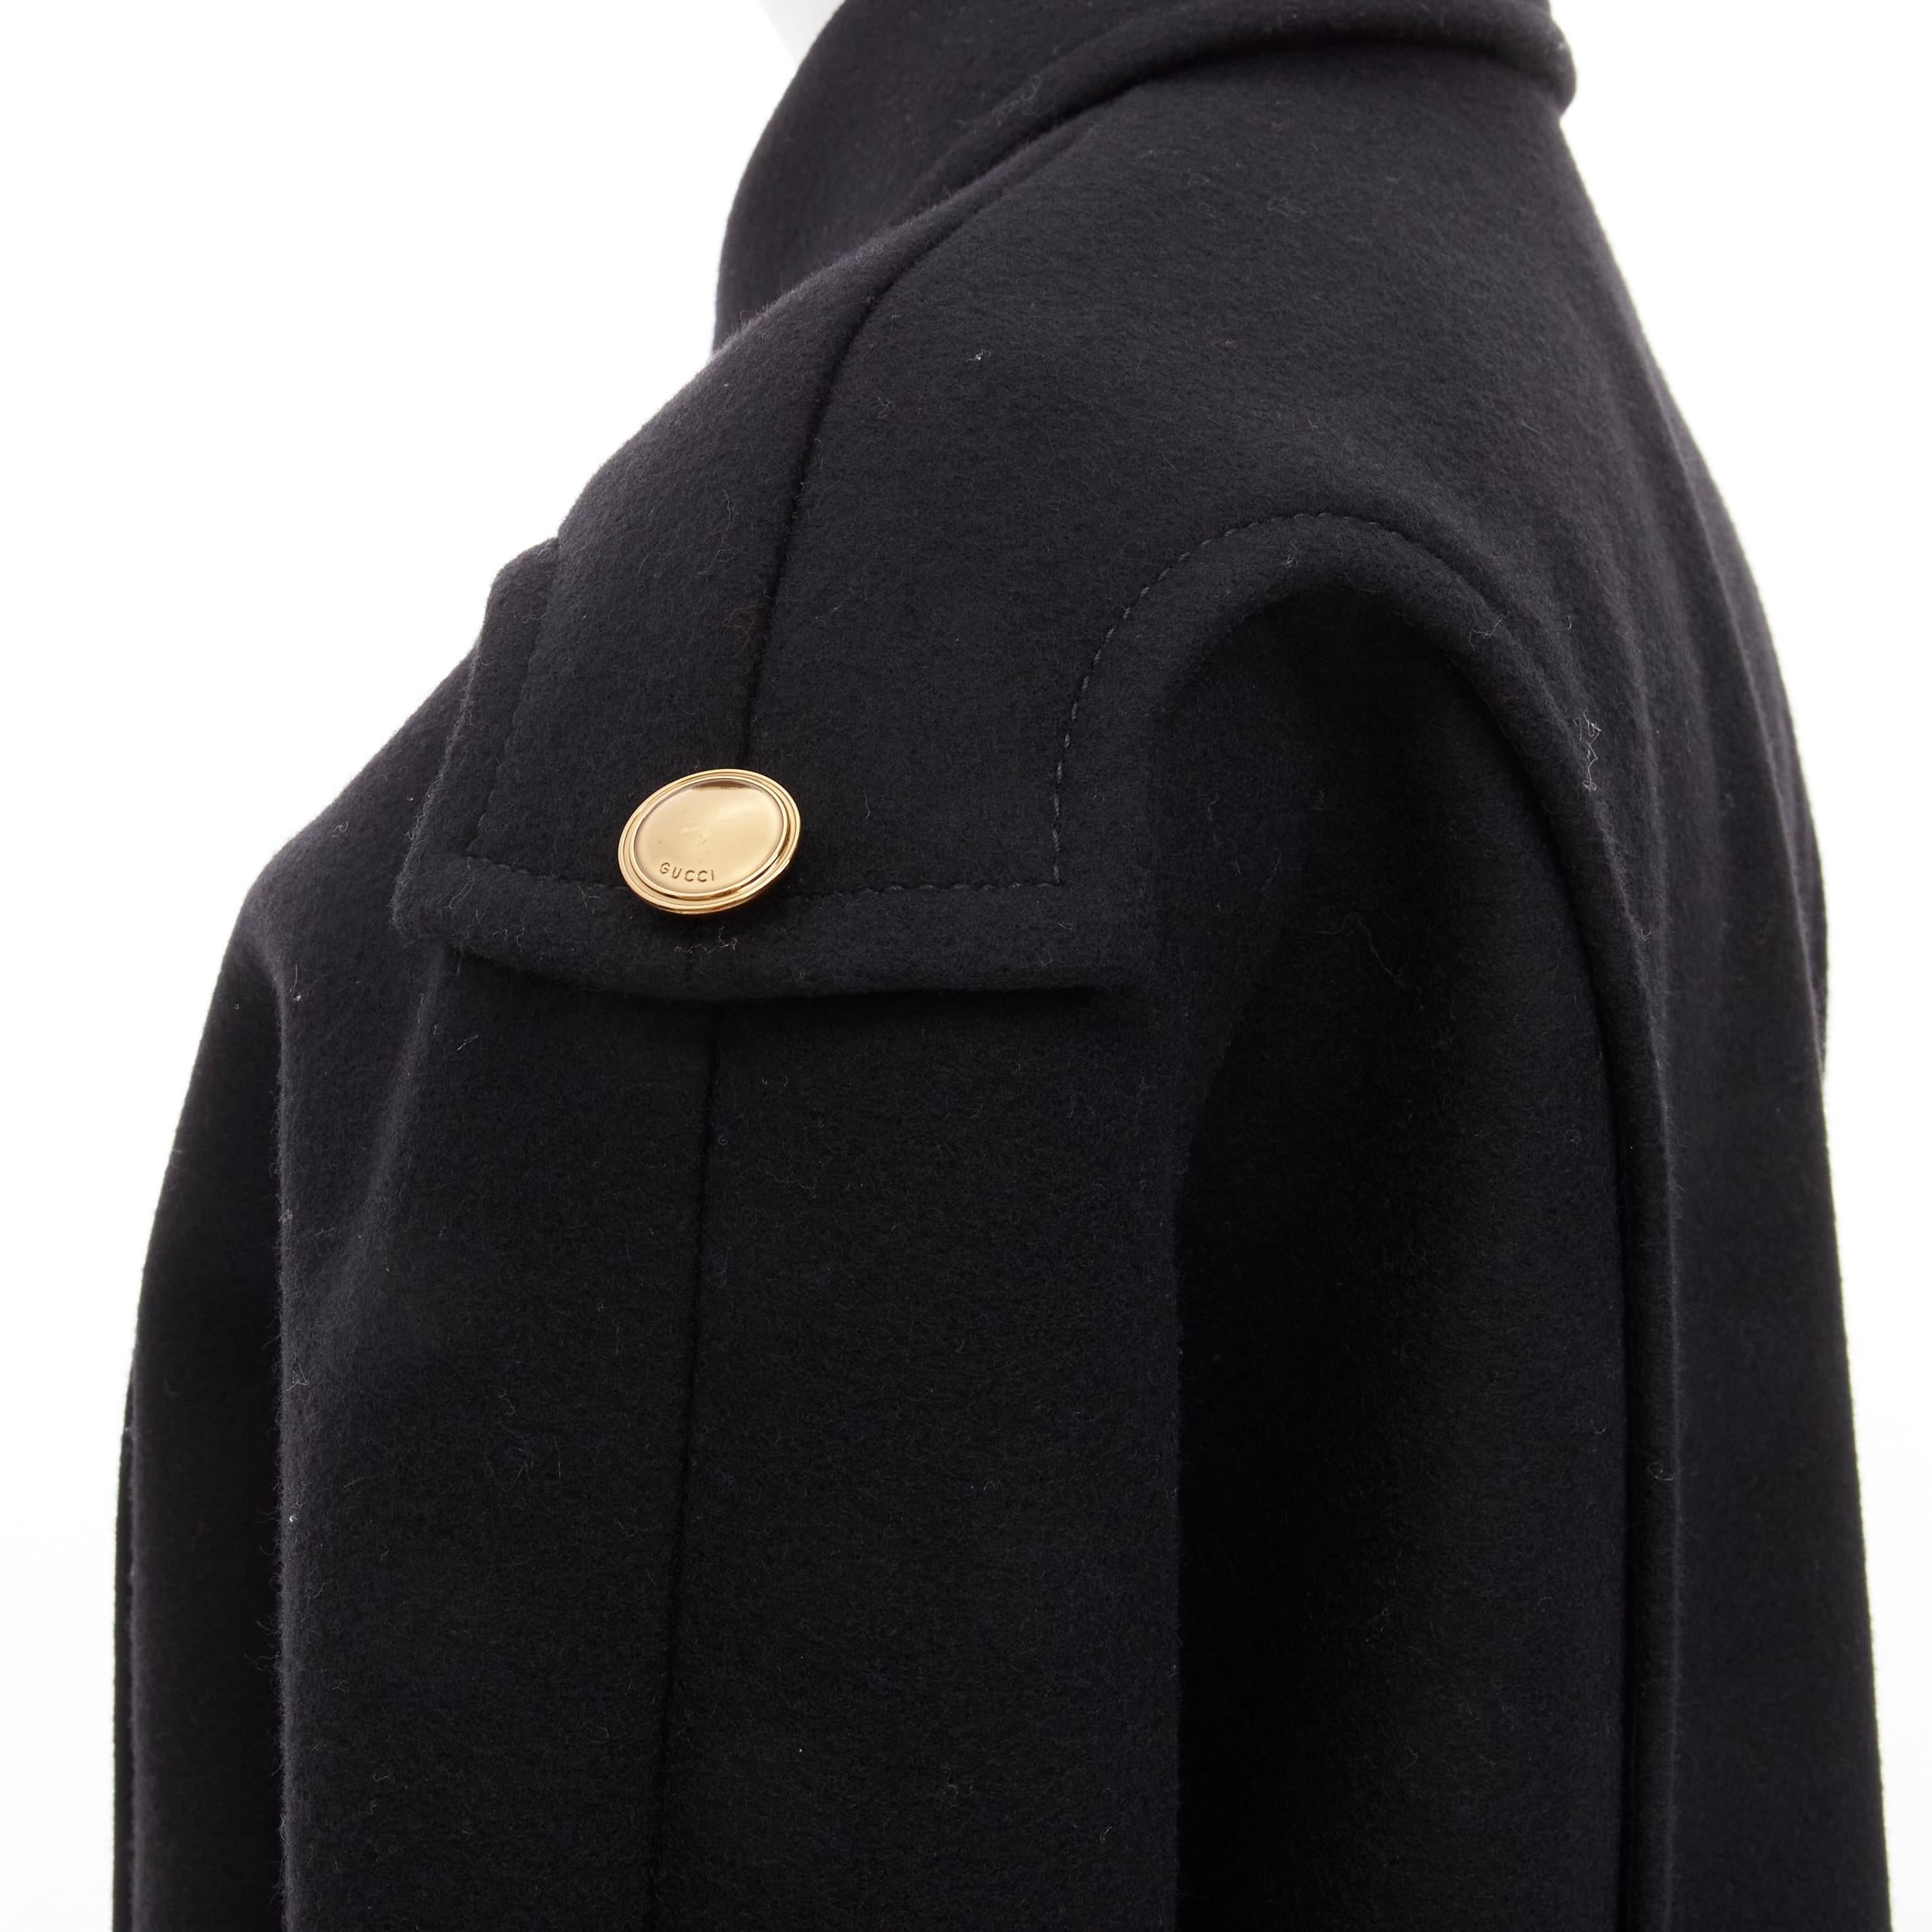 GUCCI 2012 black wool gold buttons zip front cocoon military coat IT38 XS
Brand: Gucci
Collection: 2012 
Material: Wool
Color: Black
Pattern: Solid
Closure: Zip
Extra Detail: Decorative gold-tone Gucci buttons. Double zip front closure. Rounded